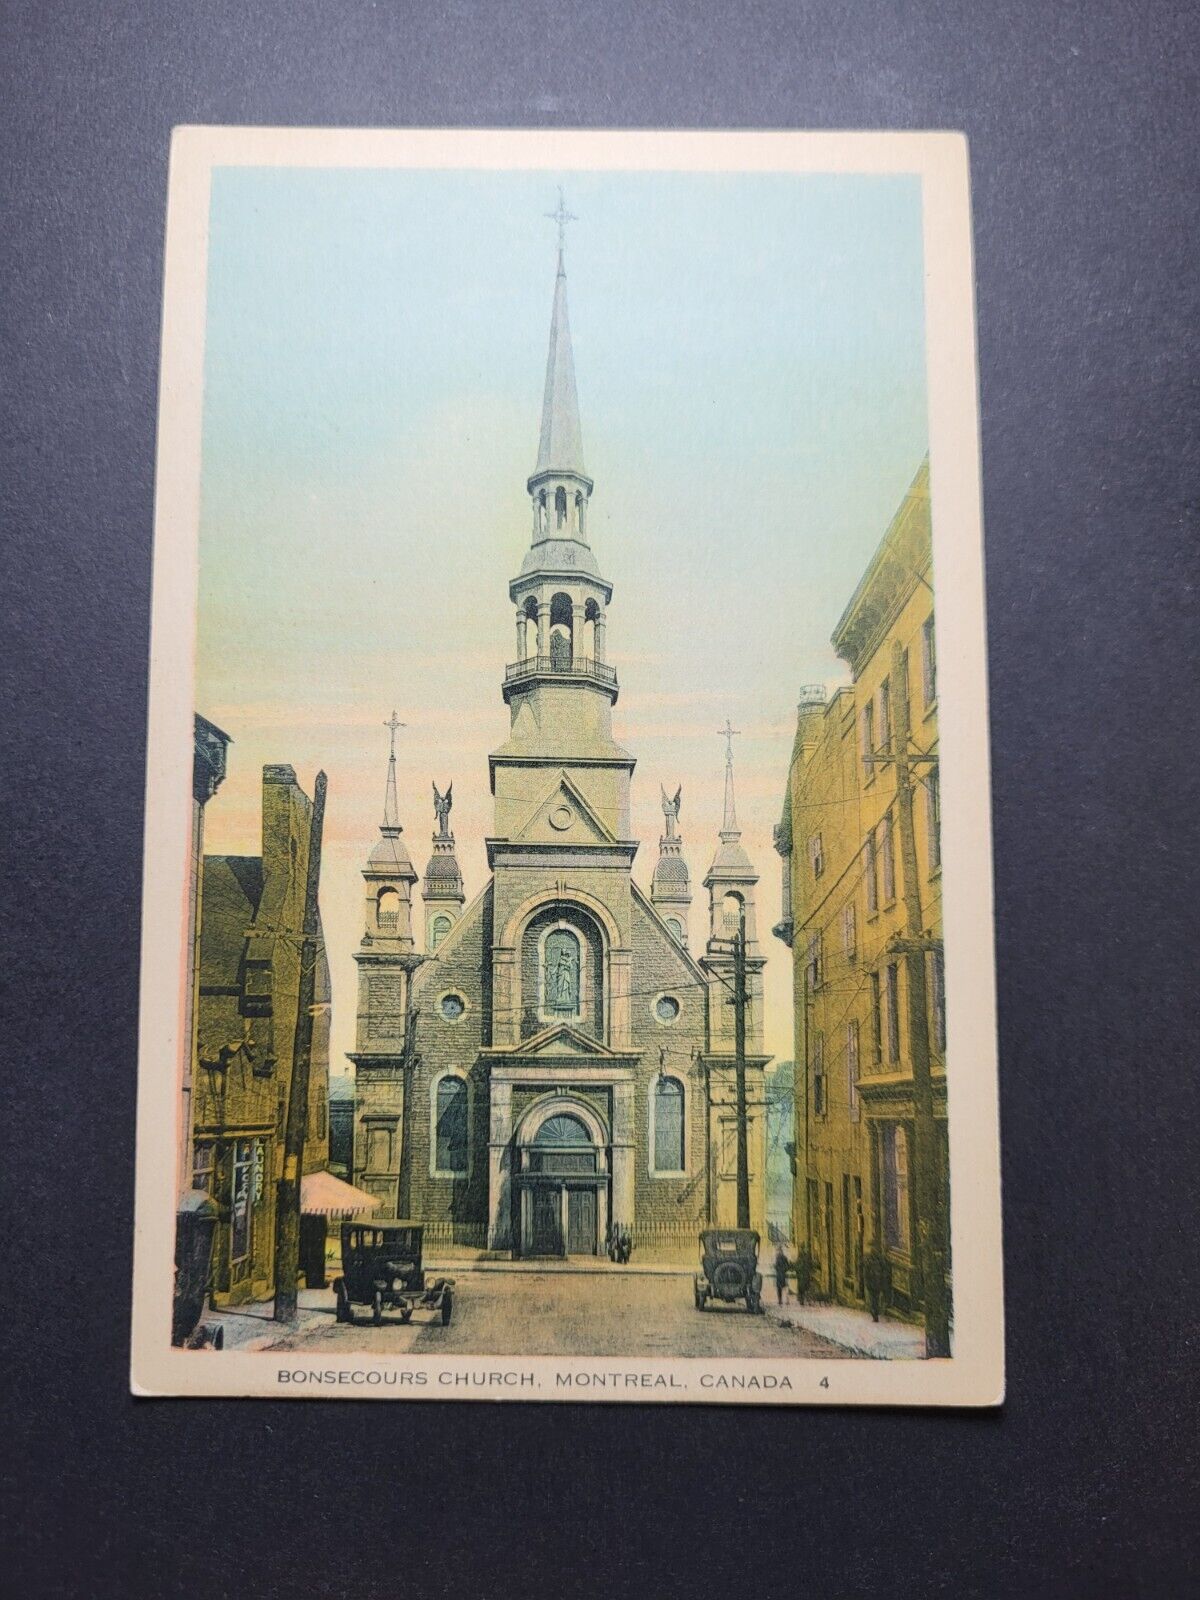 Montreal Canada Postcard Bonsecours Church Vintage Cars Parked on The Street